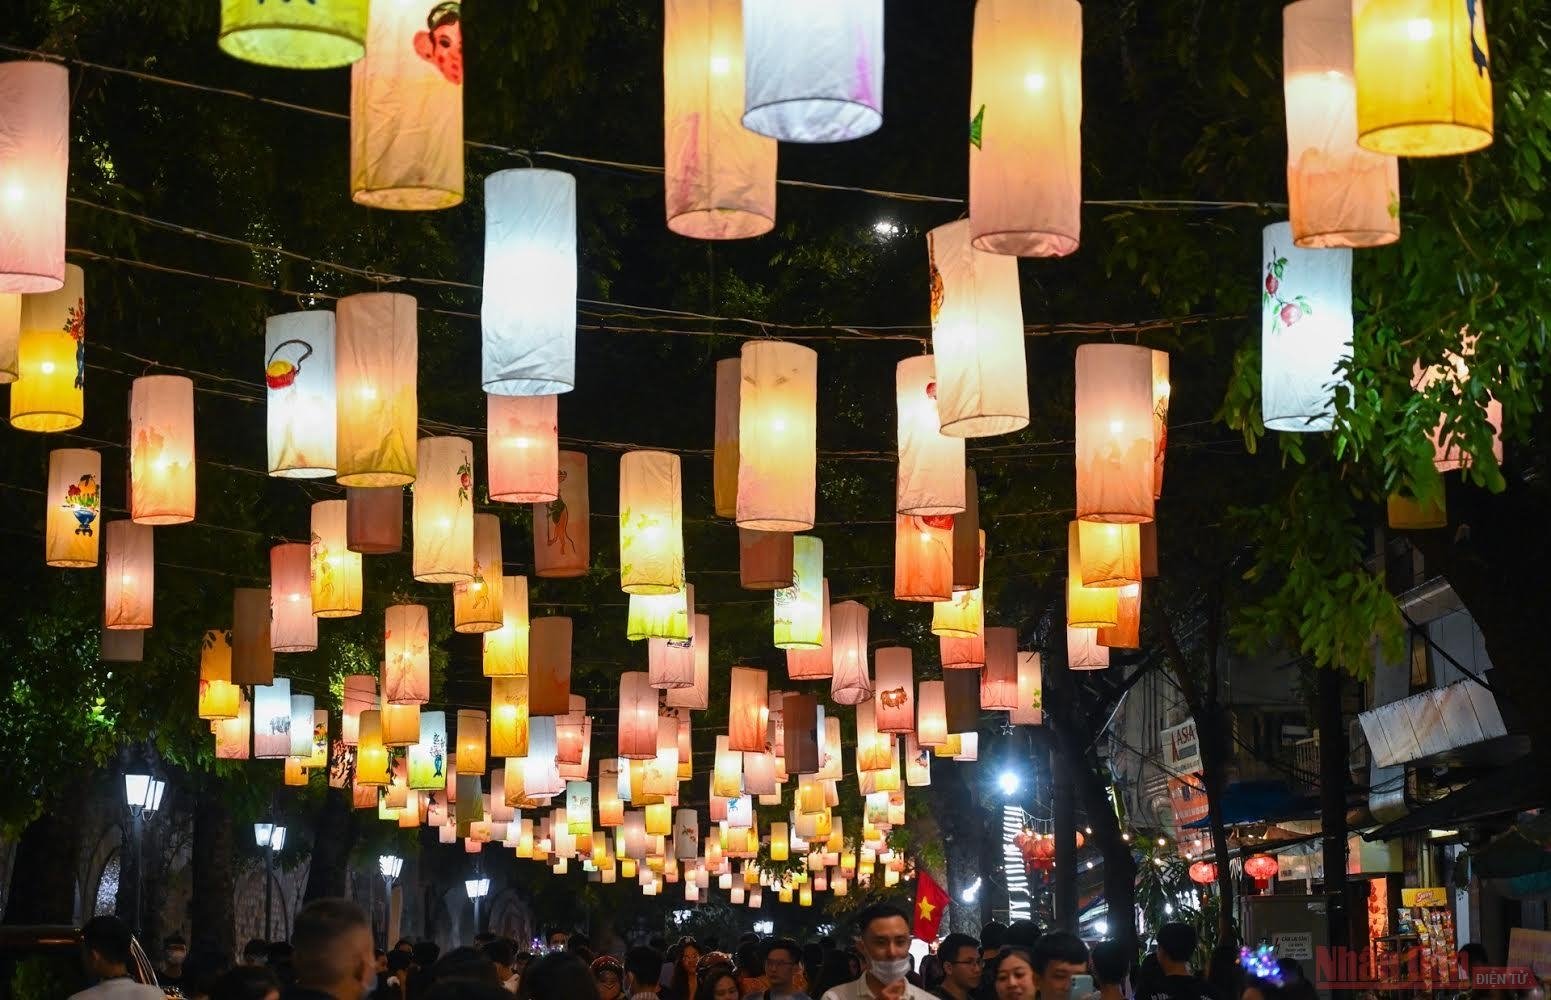 'Lanterns light up dreams' programme connects children in 7 provinces and cities